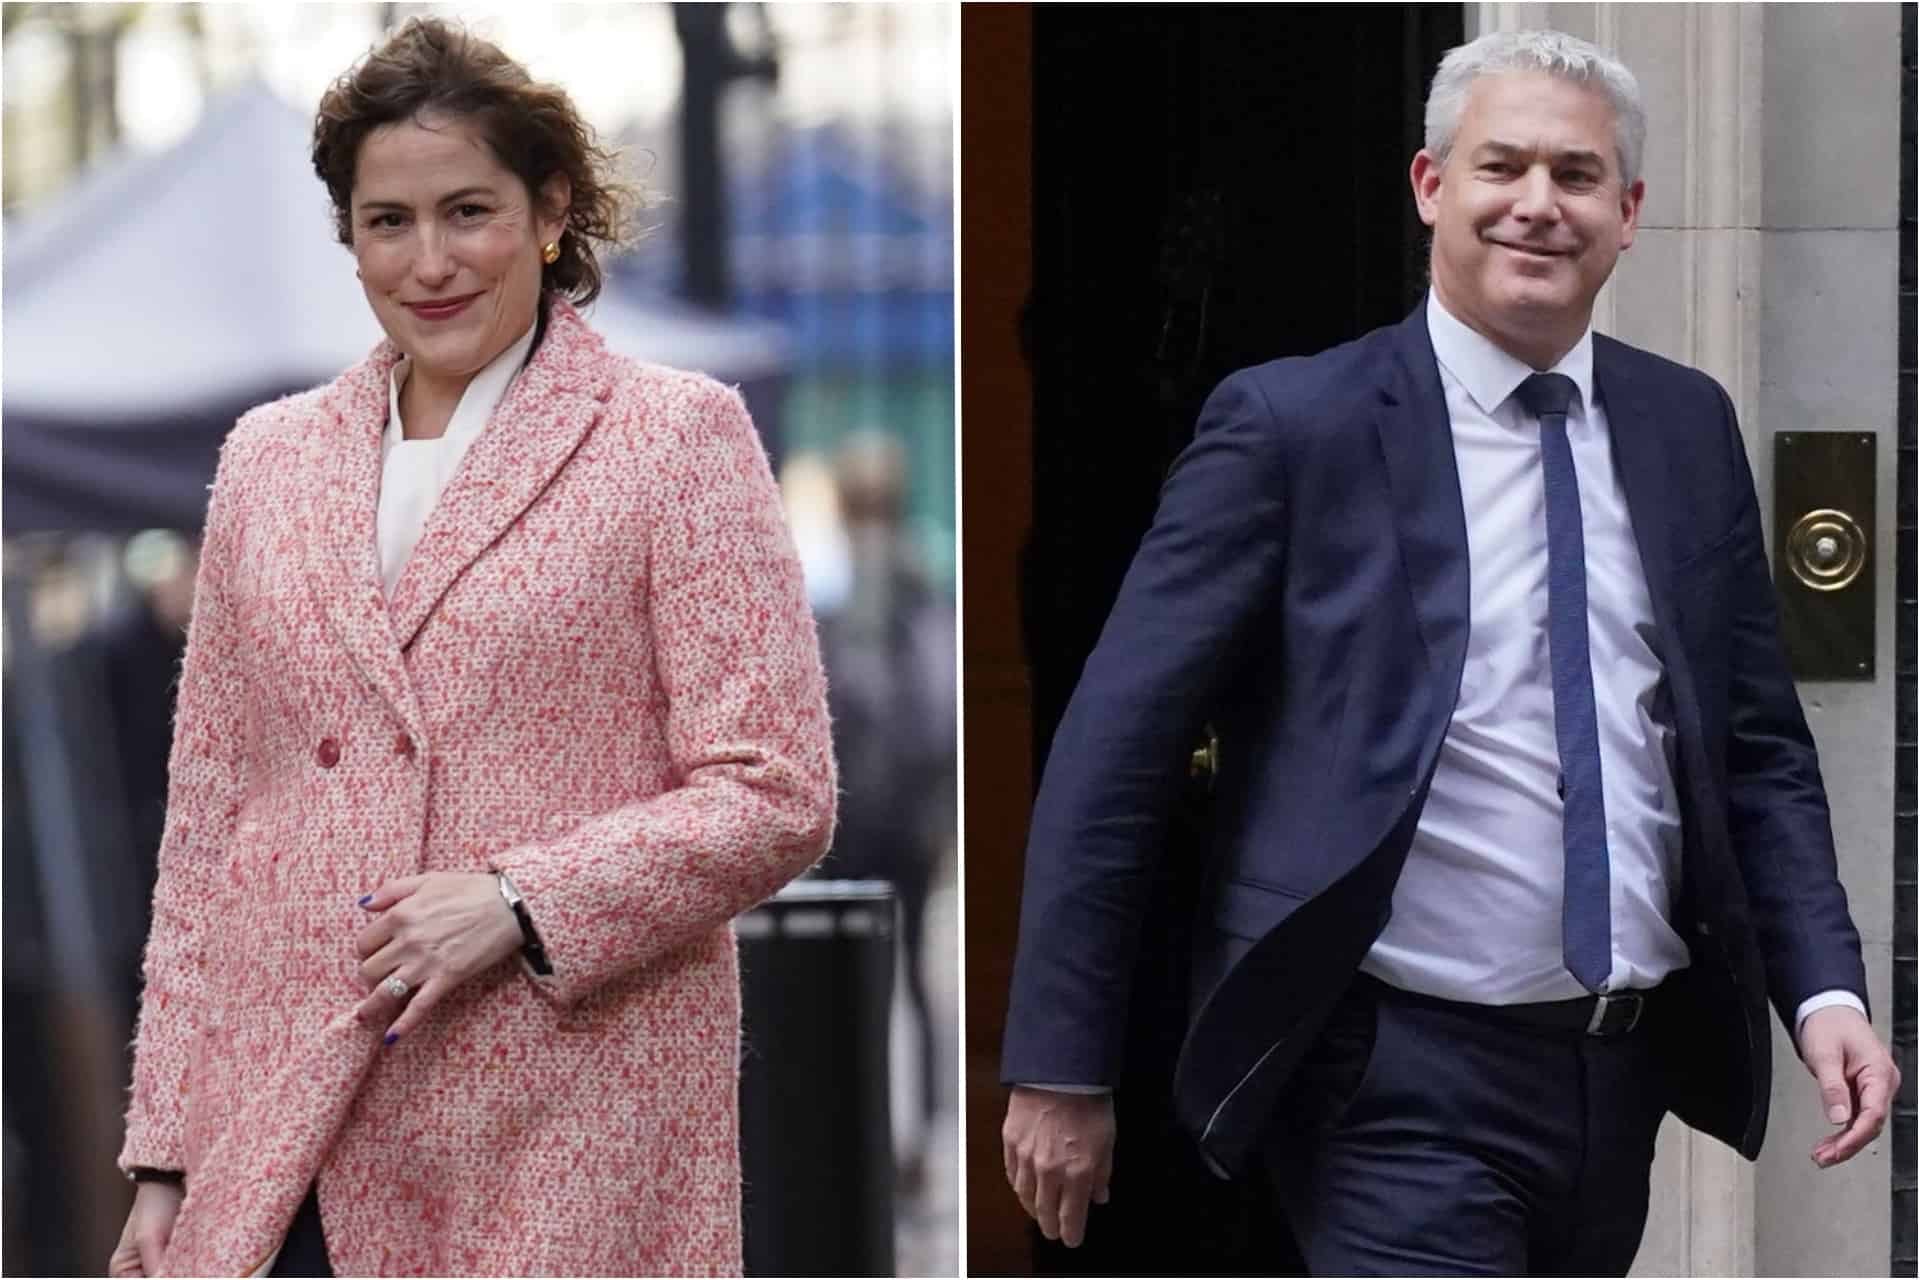 New environment and health chiefs both have connected spouses